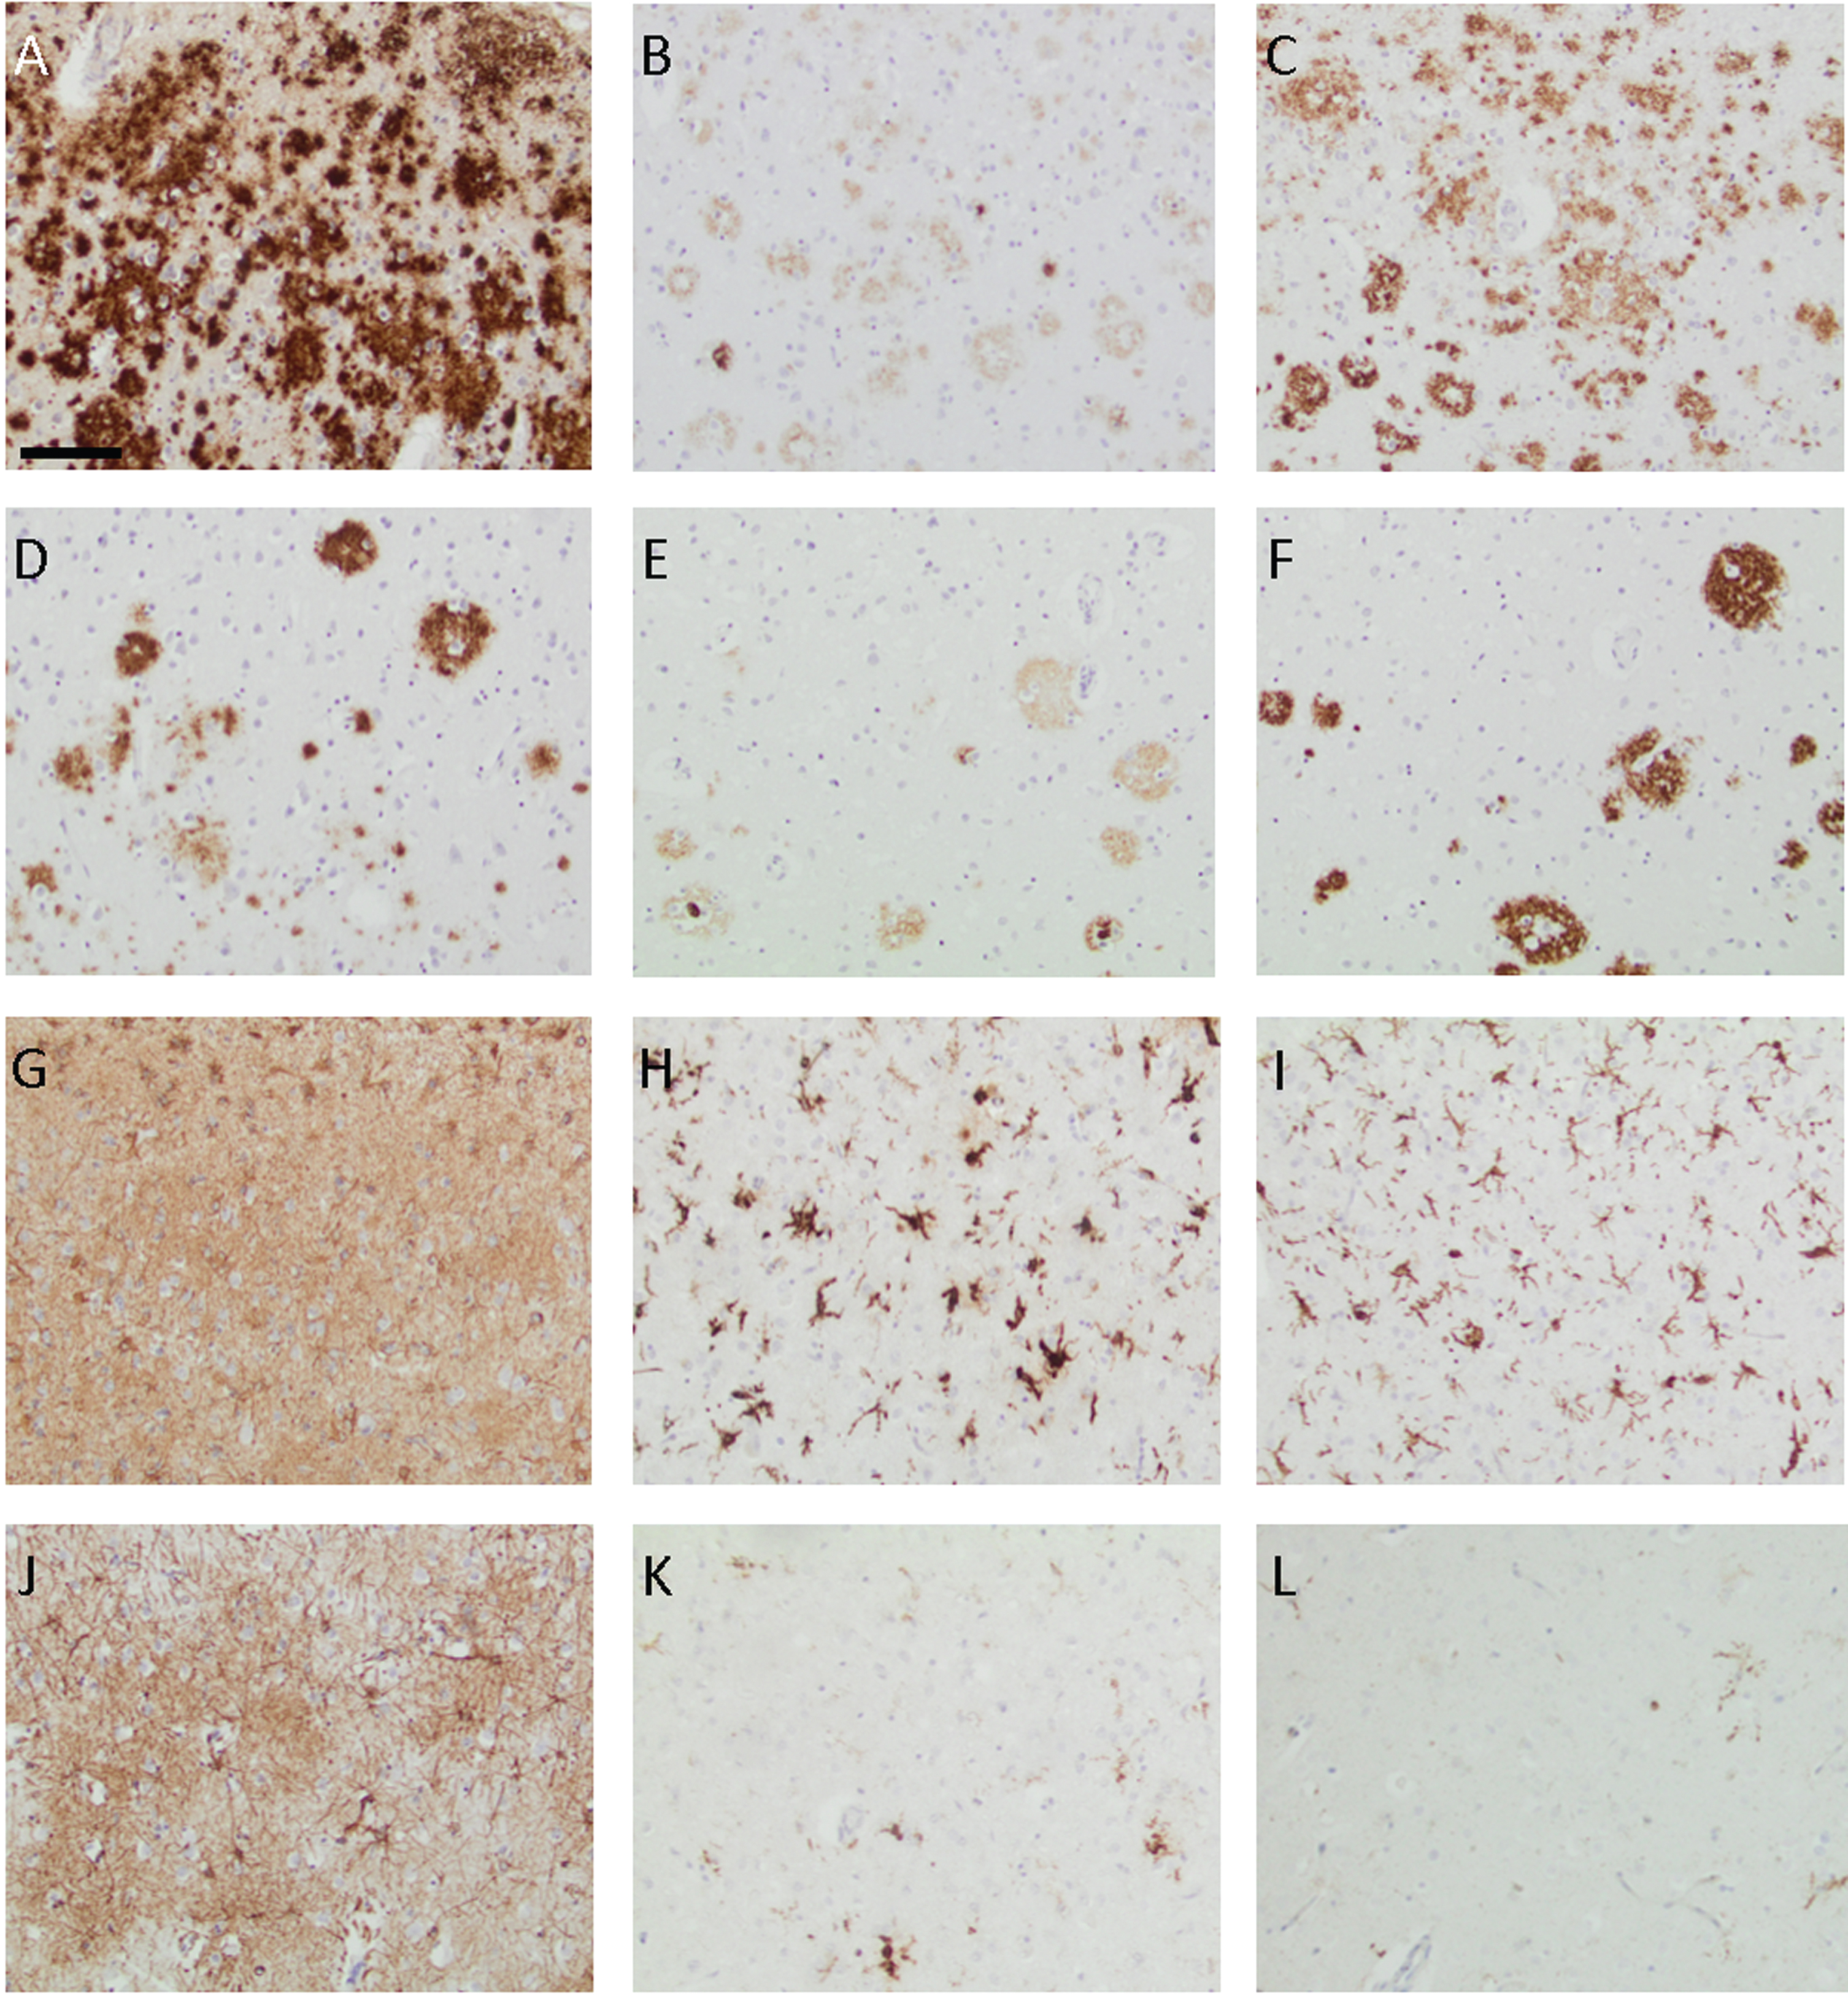 Photomicrographs of the neocortex from the PSEN1 G206R mutation carrier (A–C and G–I) and the subject with sporadic Alzheimer’s disease (D–F and J–L) when applying antibodies to the total amyloid-β (Aβ) (A and D), Aβ40 (B and E), Aβ42 (C and F), glial fibrillary acidic protein (G and J), human leucocytic antigen-DR (H and K), and ionized calcium-binding adaptor molecule 1 (I–L). Bar in A-L 100μm.